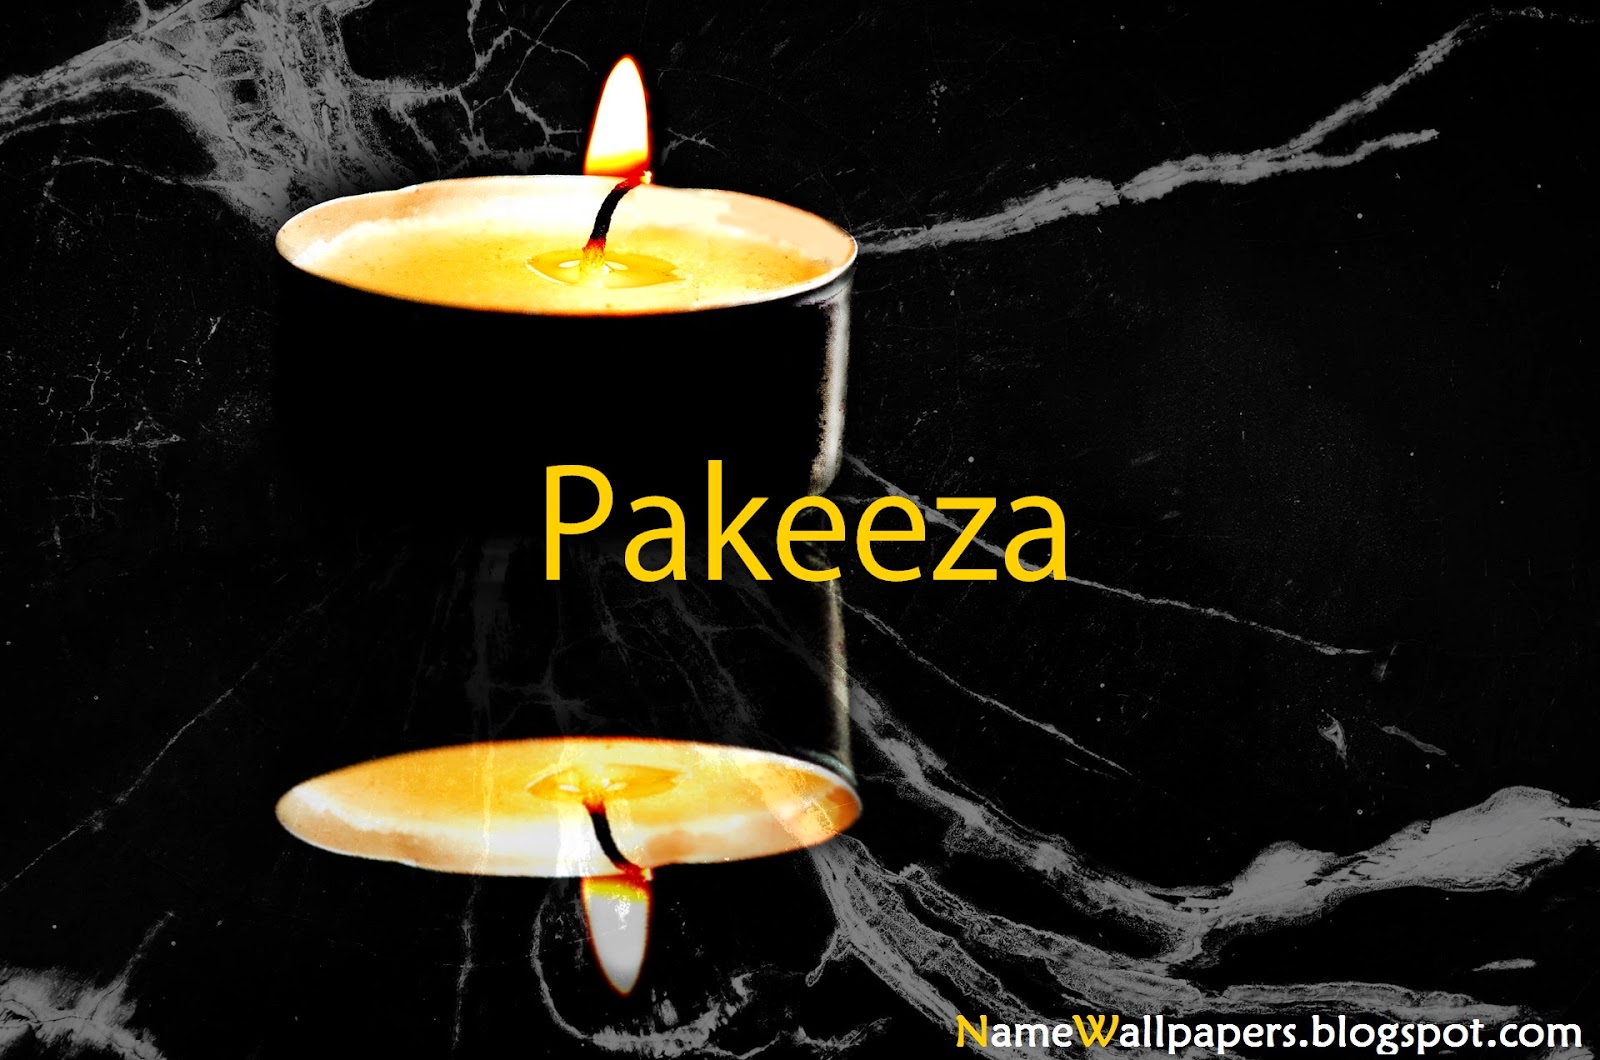 Pakeeza Name Wallpapers Pakeeza Name Wallpaper Urdu Name Meaning Name Images Logo Signature Find pakiza multiple name meanings and name pronunciation in english, arabic and urdu. name wallpaper urdu name meaning name images logo signature